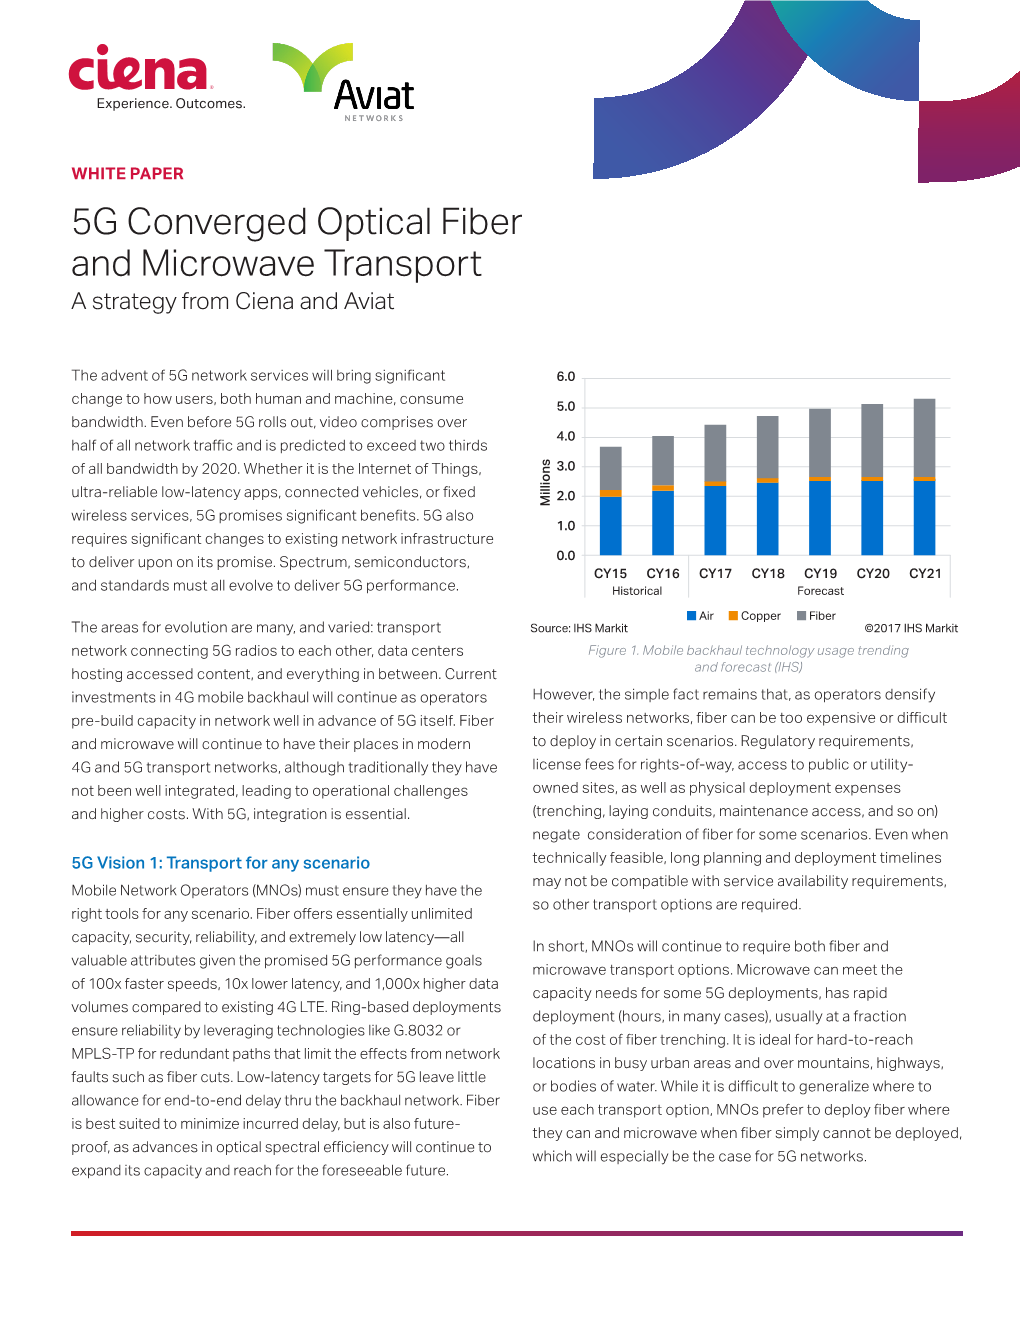 5G Converged Optical Fiber and Microwave Transport a Strategy from Ciena and Aviat